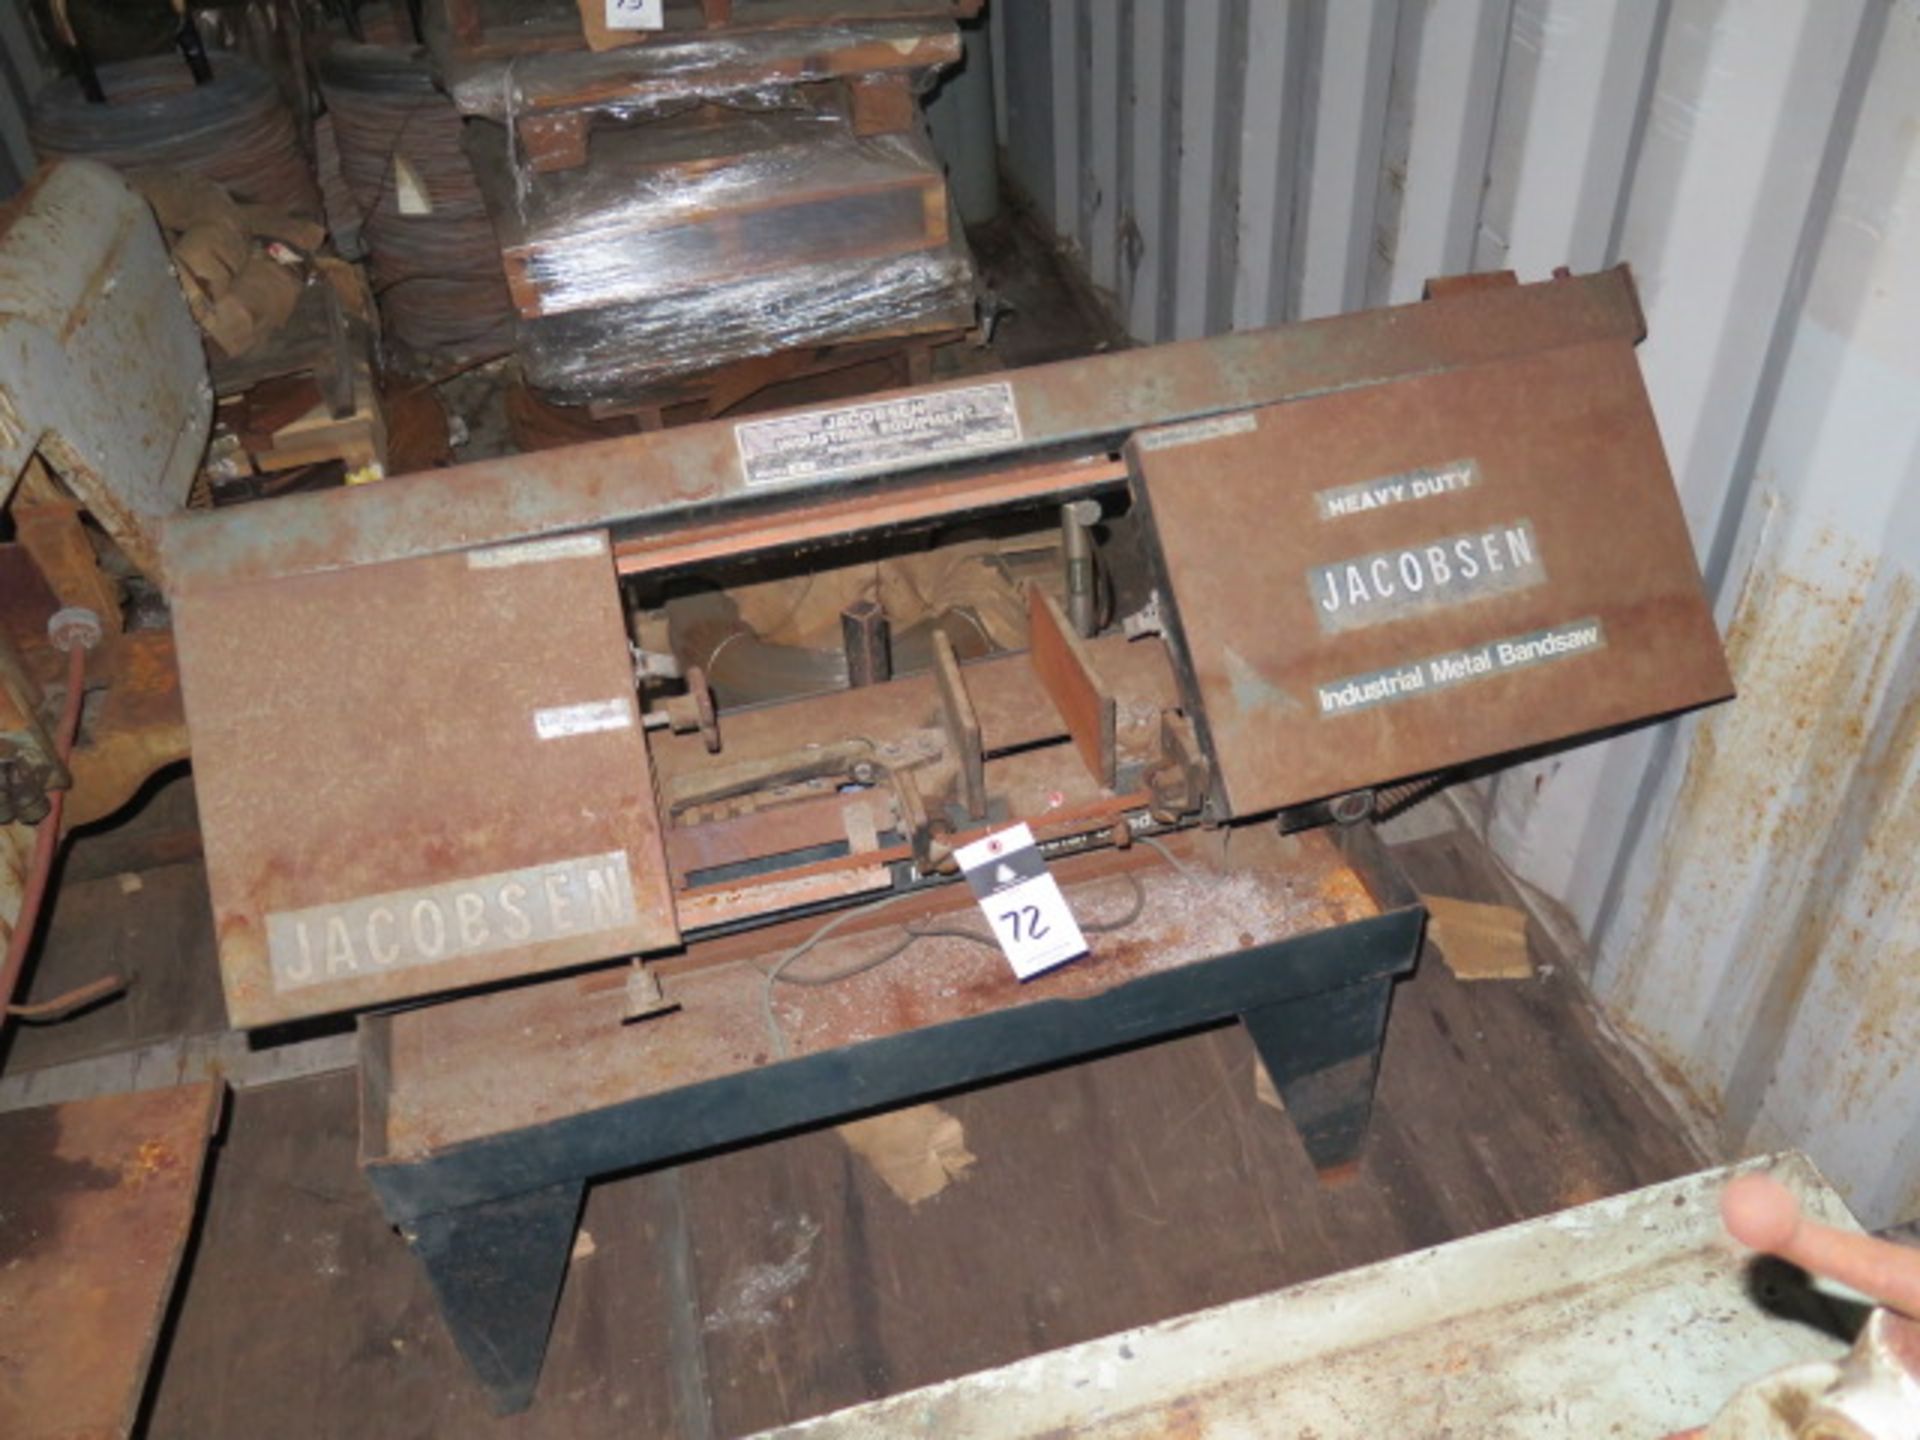 Jacobson mdl. JE12 12" Horizontal Band Saw s/n 2028 and Johnson Bandsaw(FOR PARTS)